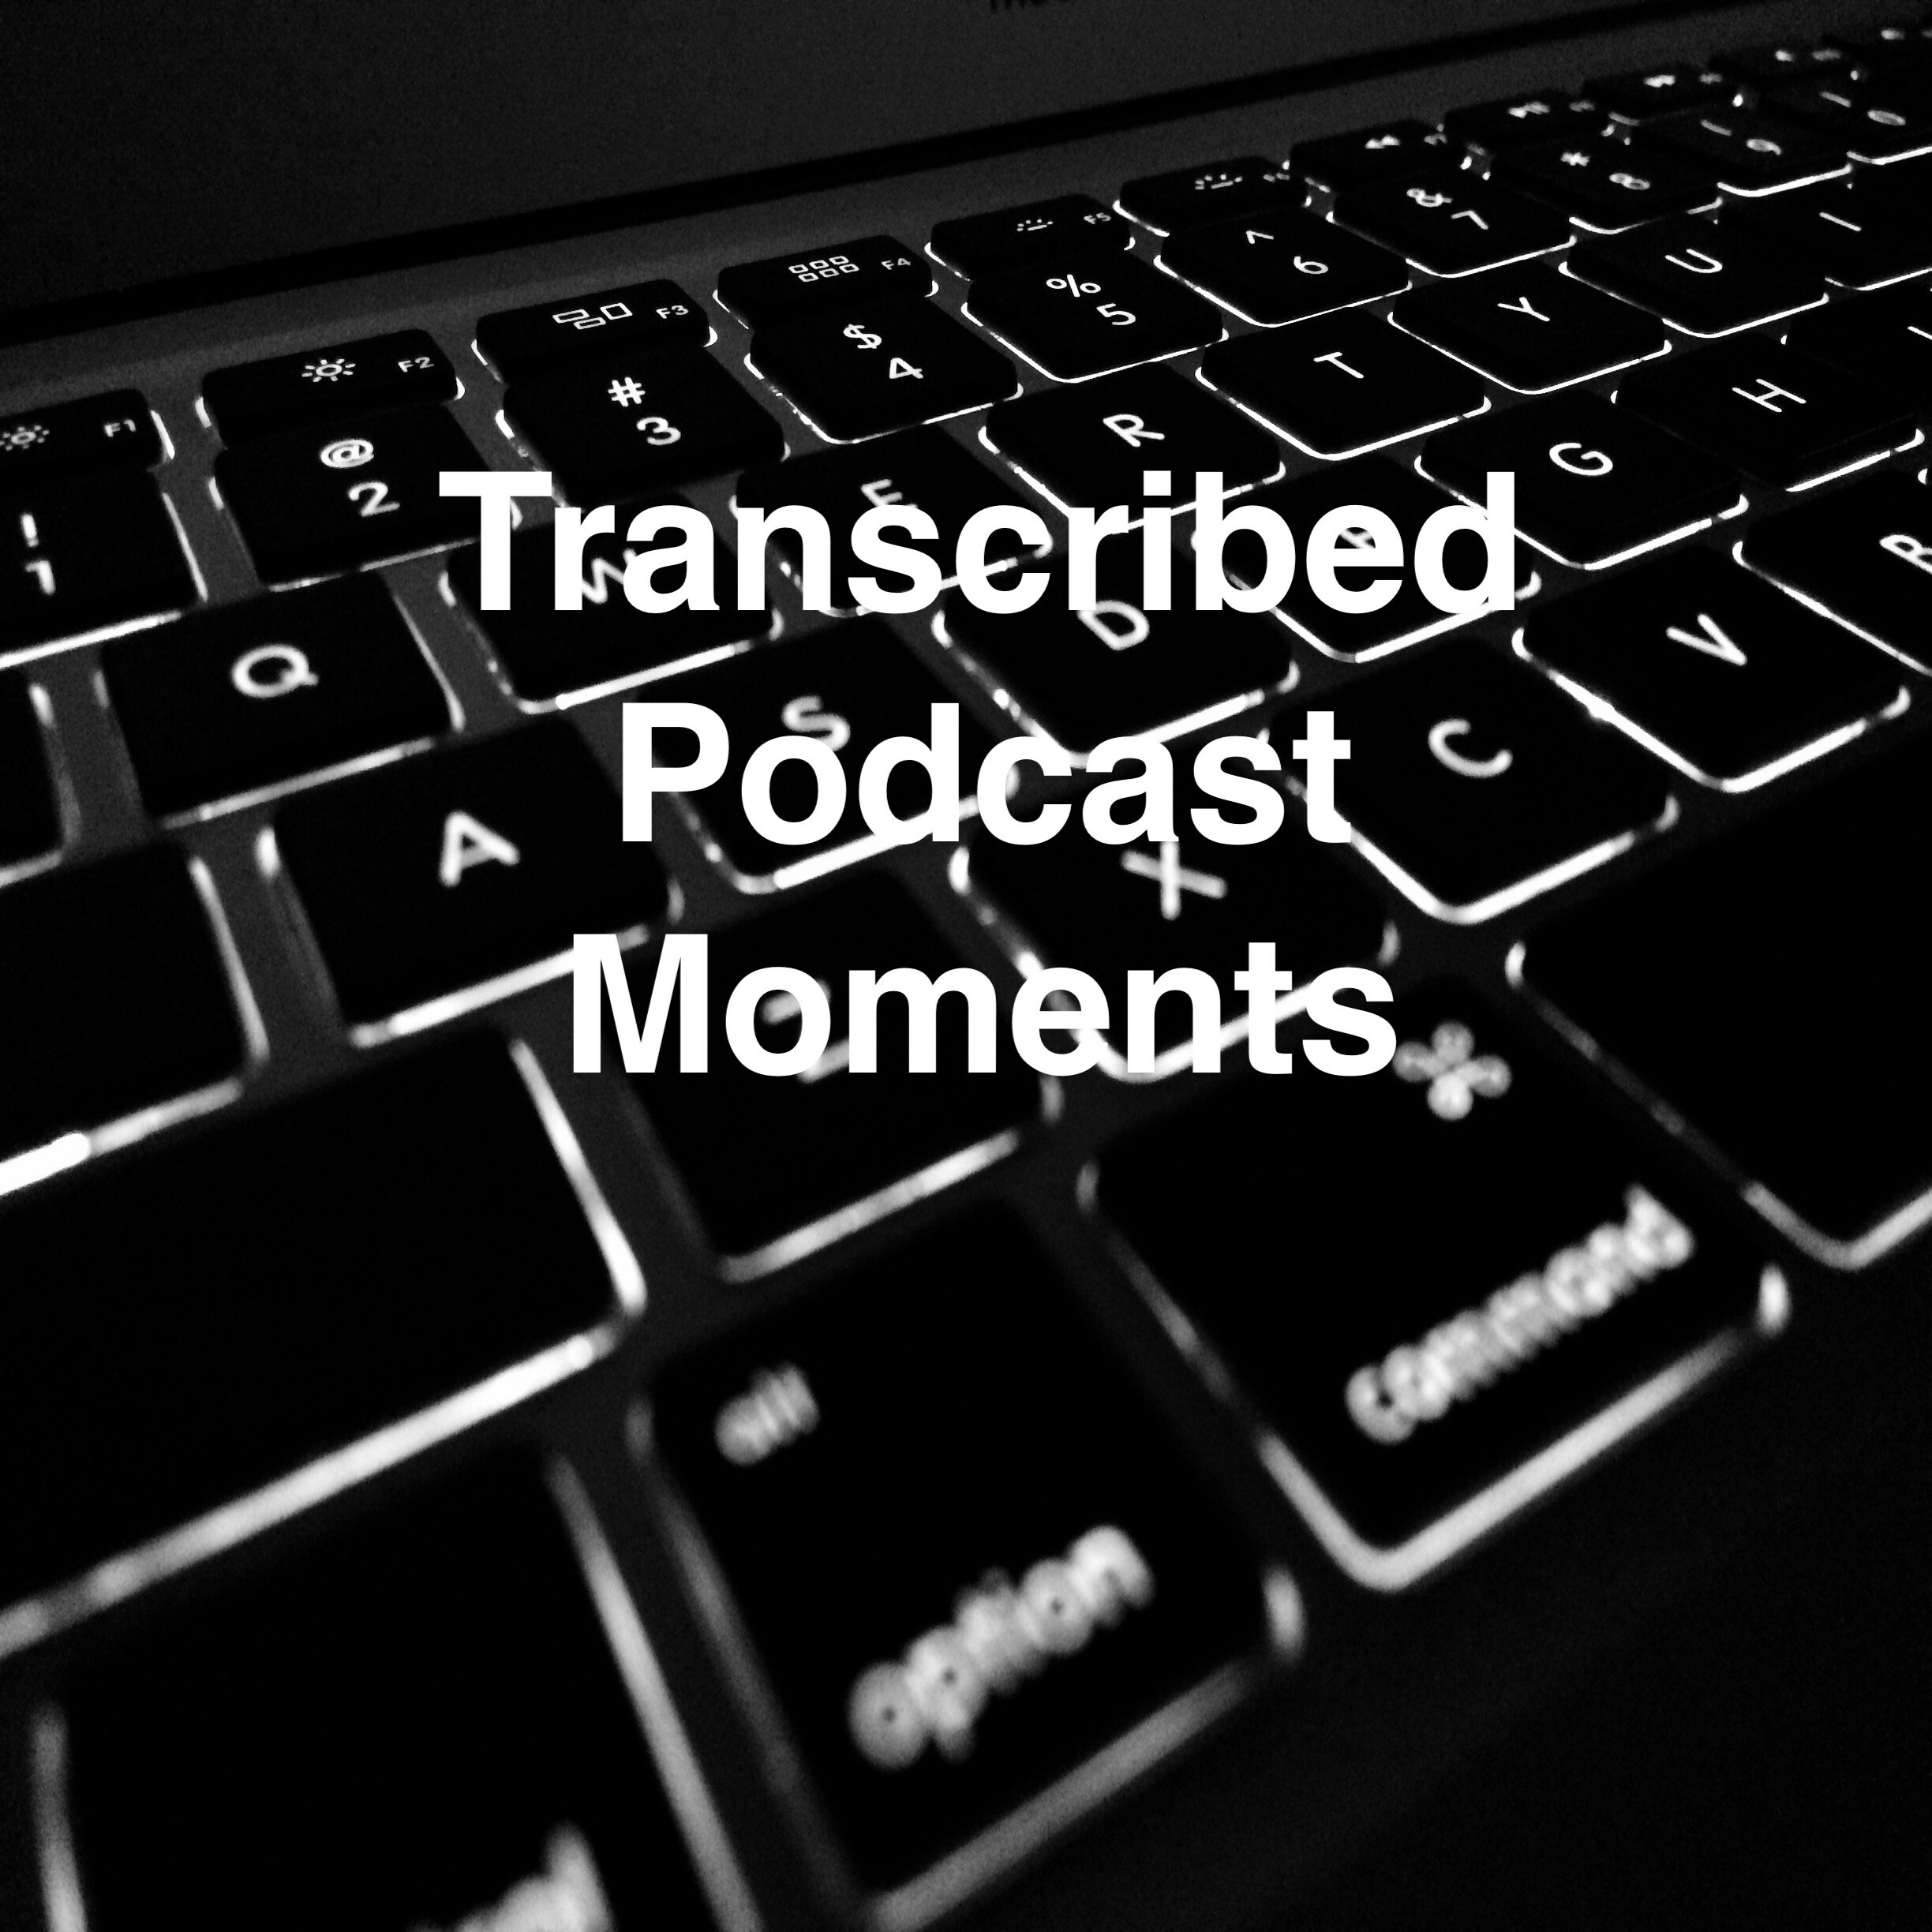  Check out some transcribed moments from some of my favorite Podcast episodes! 